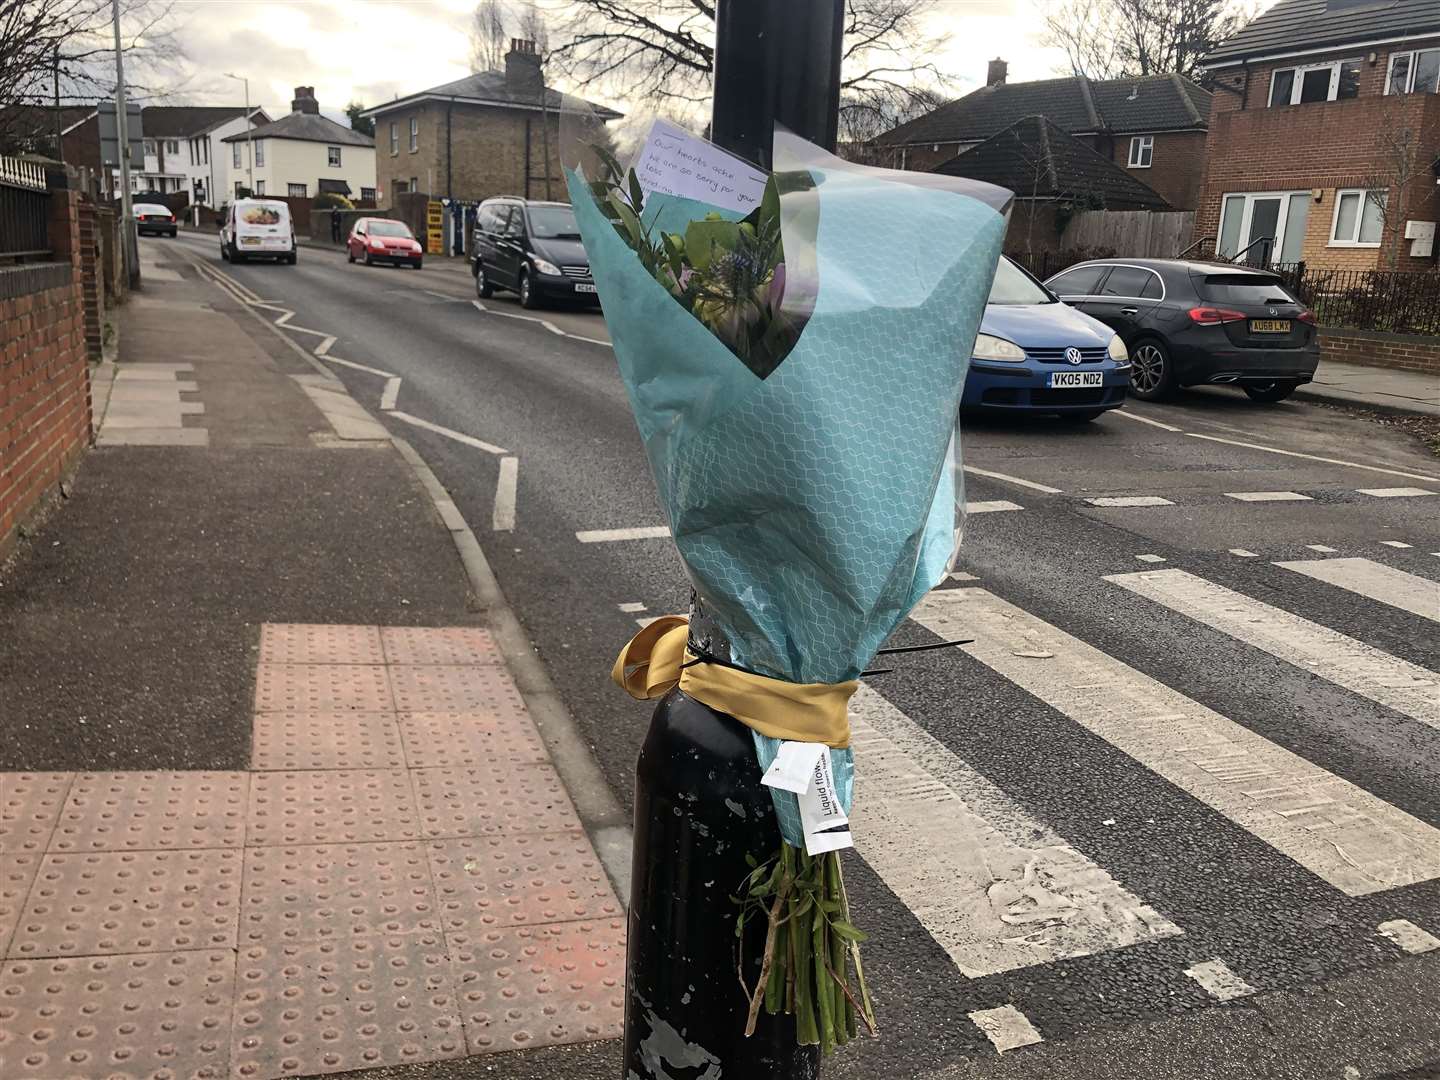 Floral, candle and basketball tributes were laid near the crossing on February 3